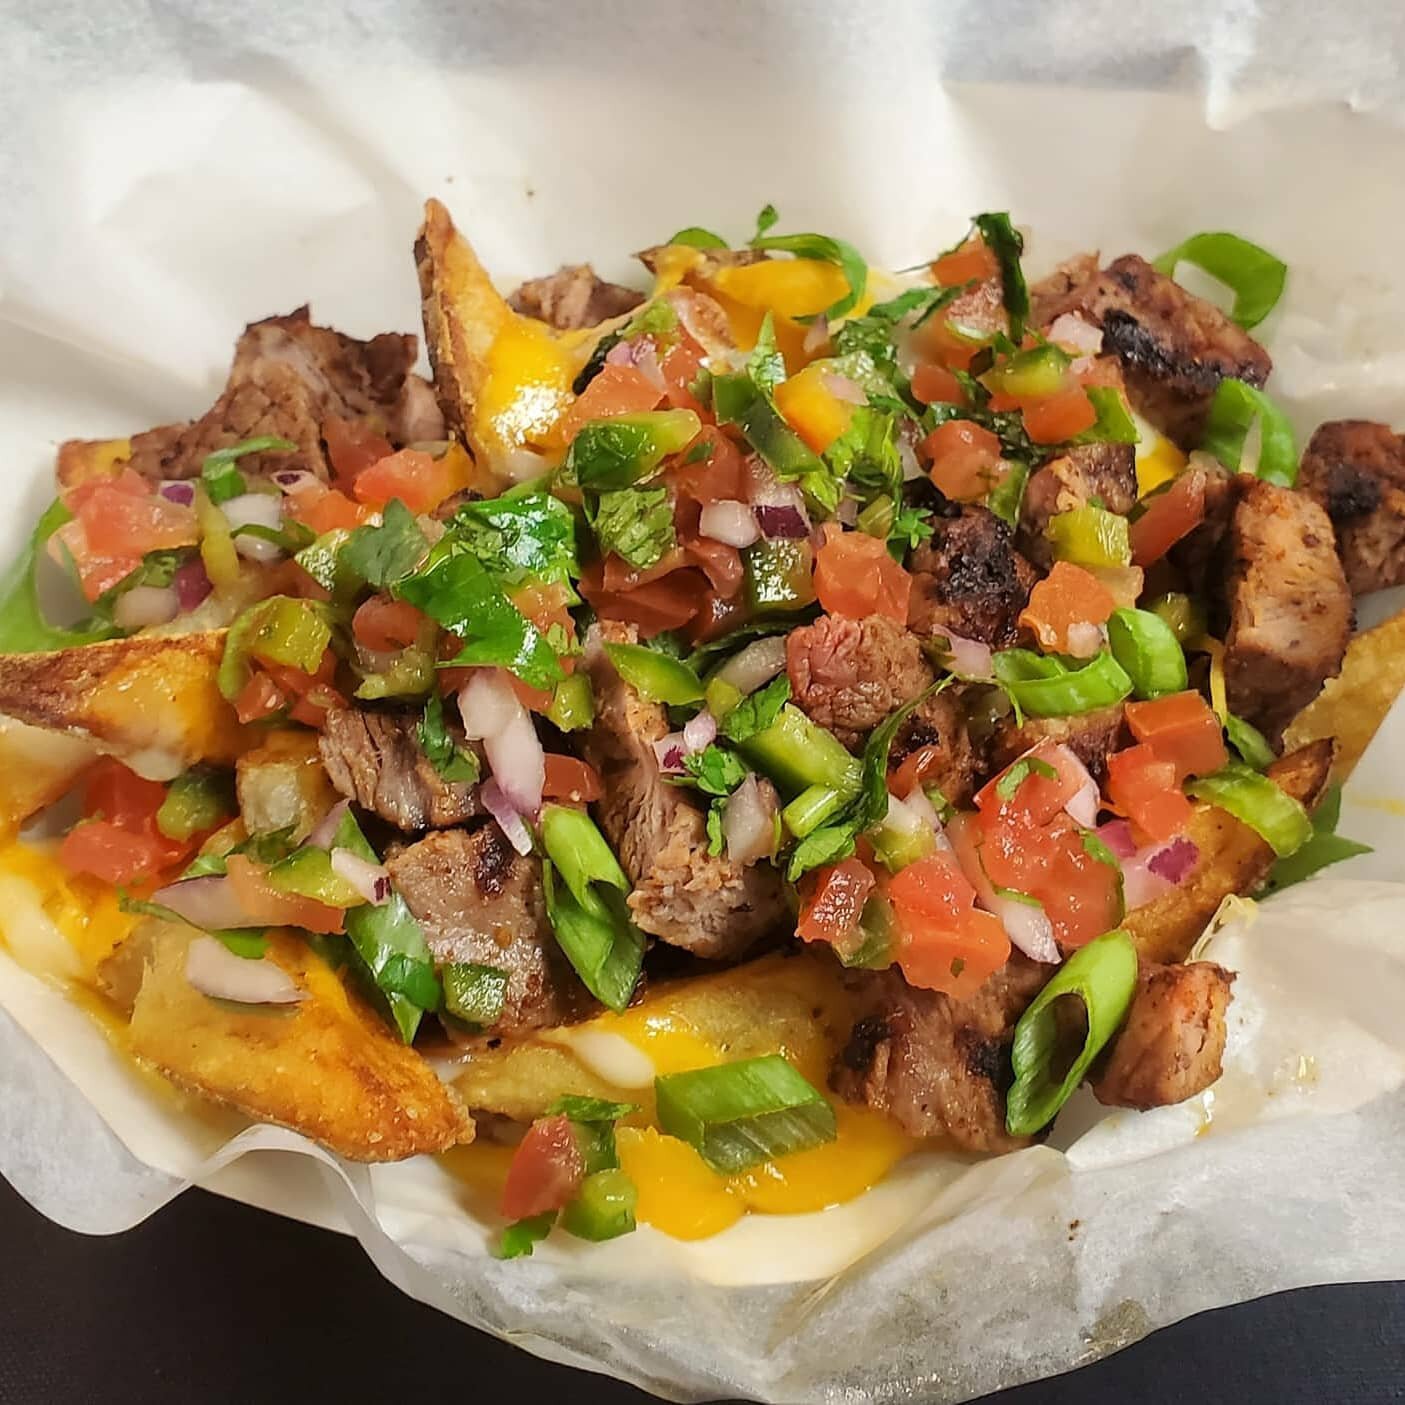 Need a little bar food in your life? Our Shrimp and Chips or the Asada Fries should hit the spot.